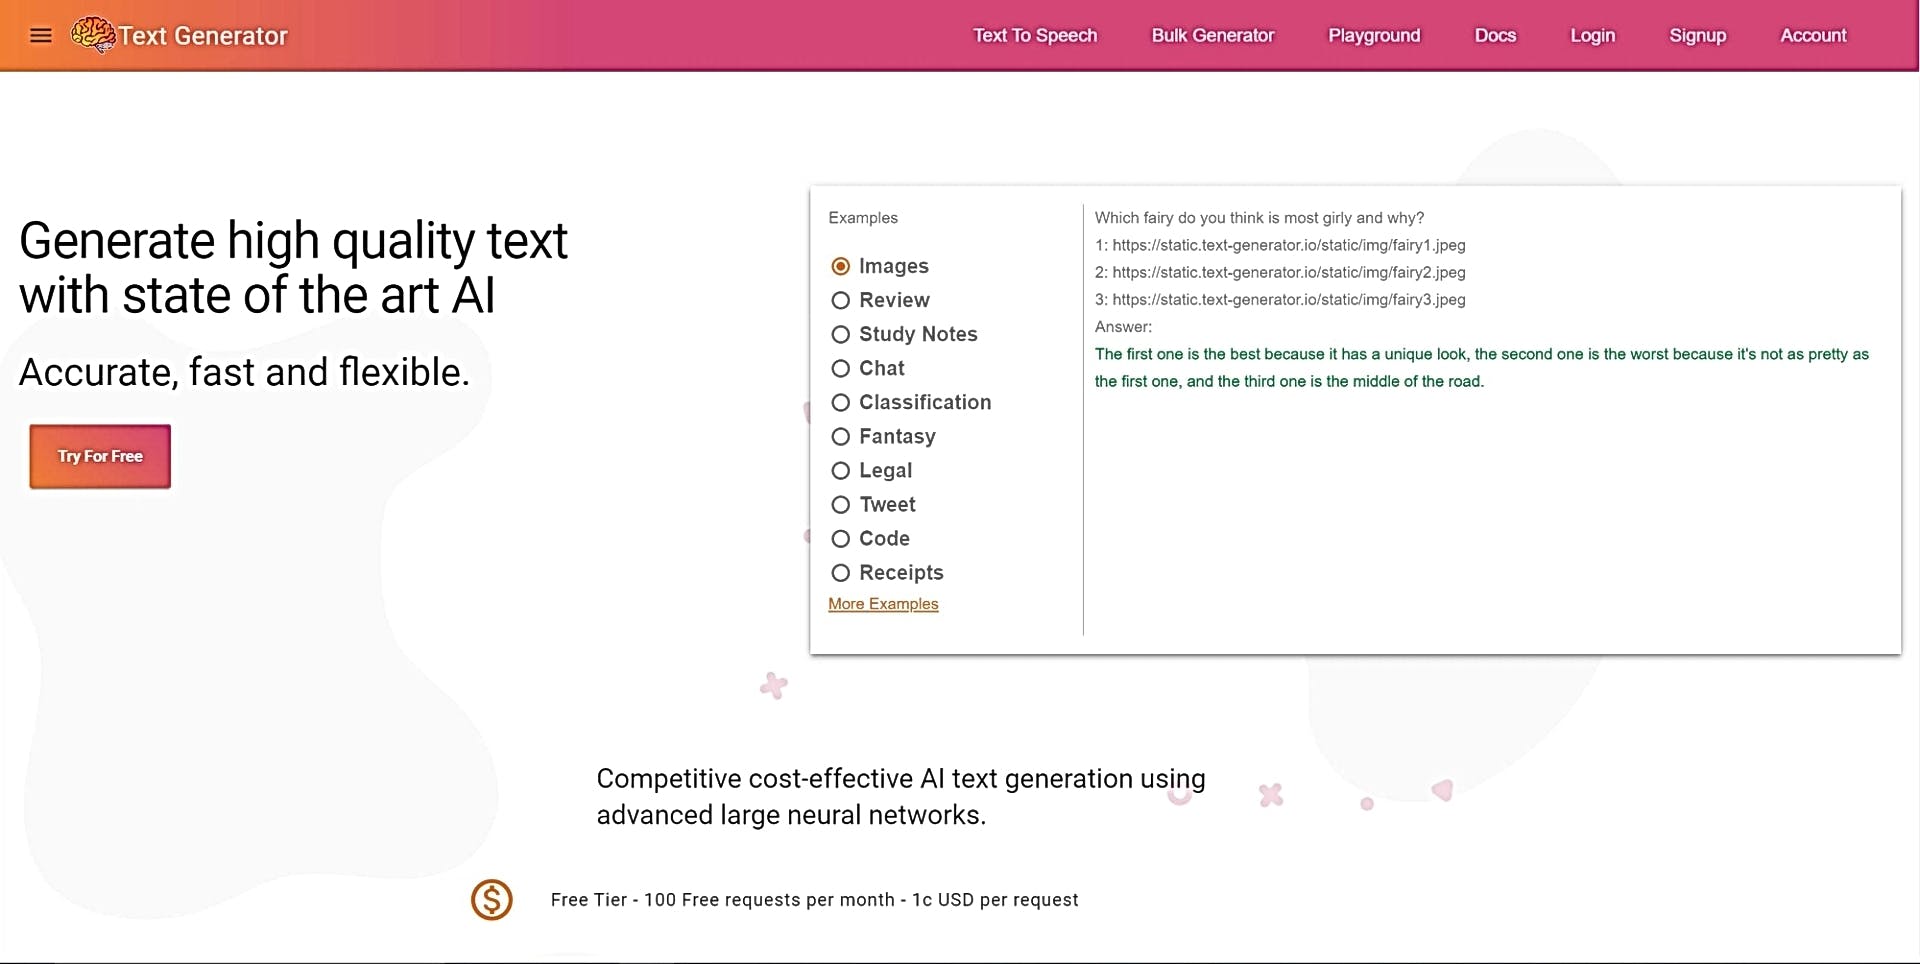 Text Generator featured